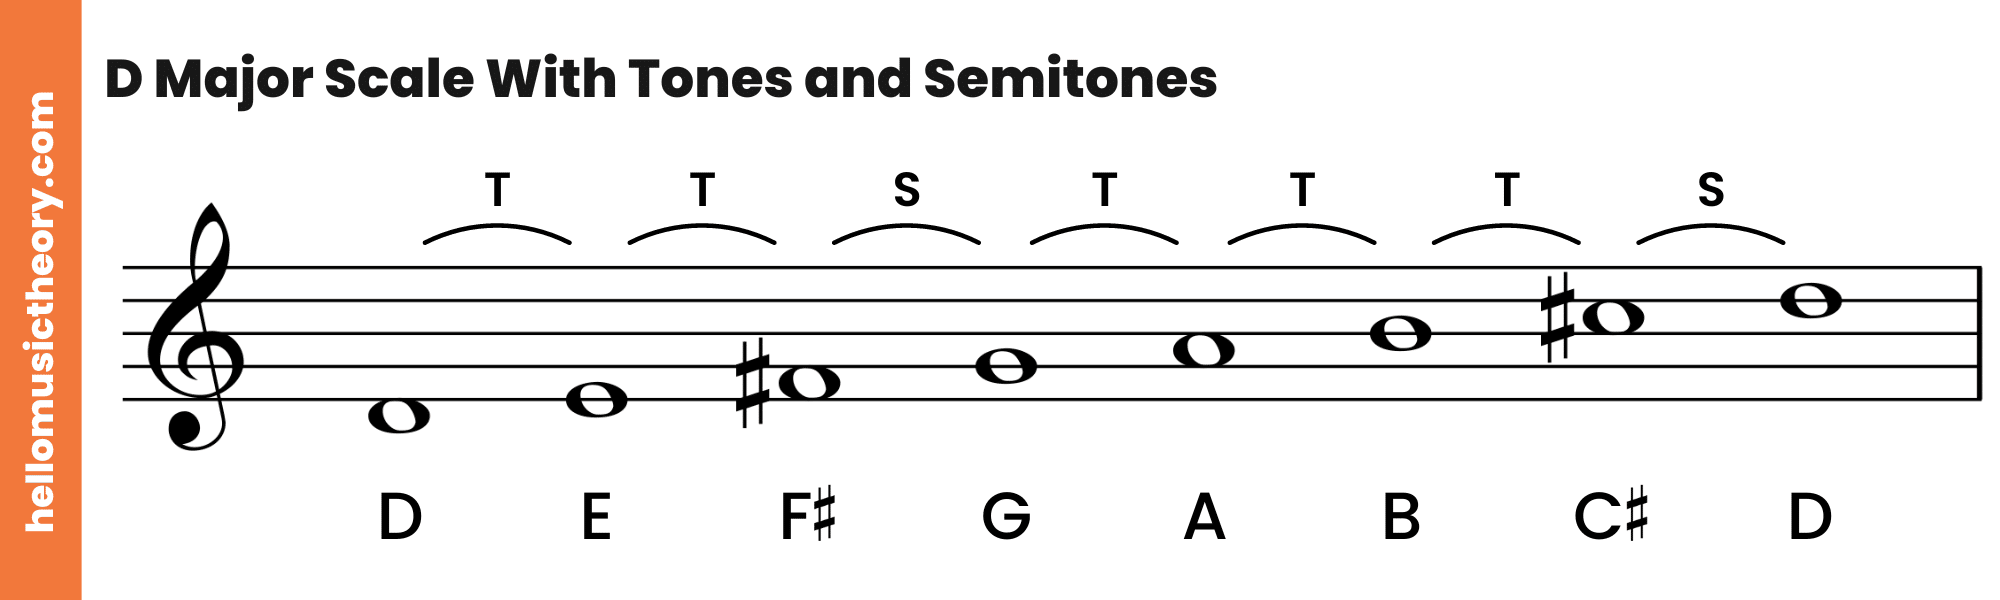 D Major Scale Treble Clef With Tones and Semitones